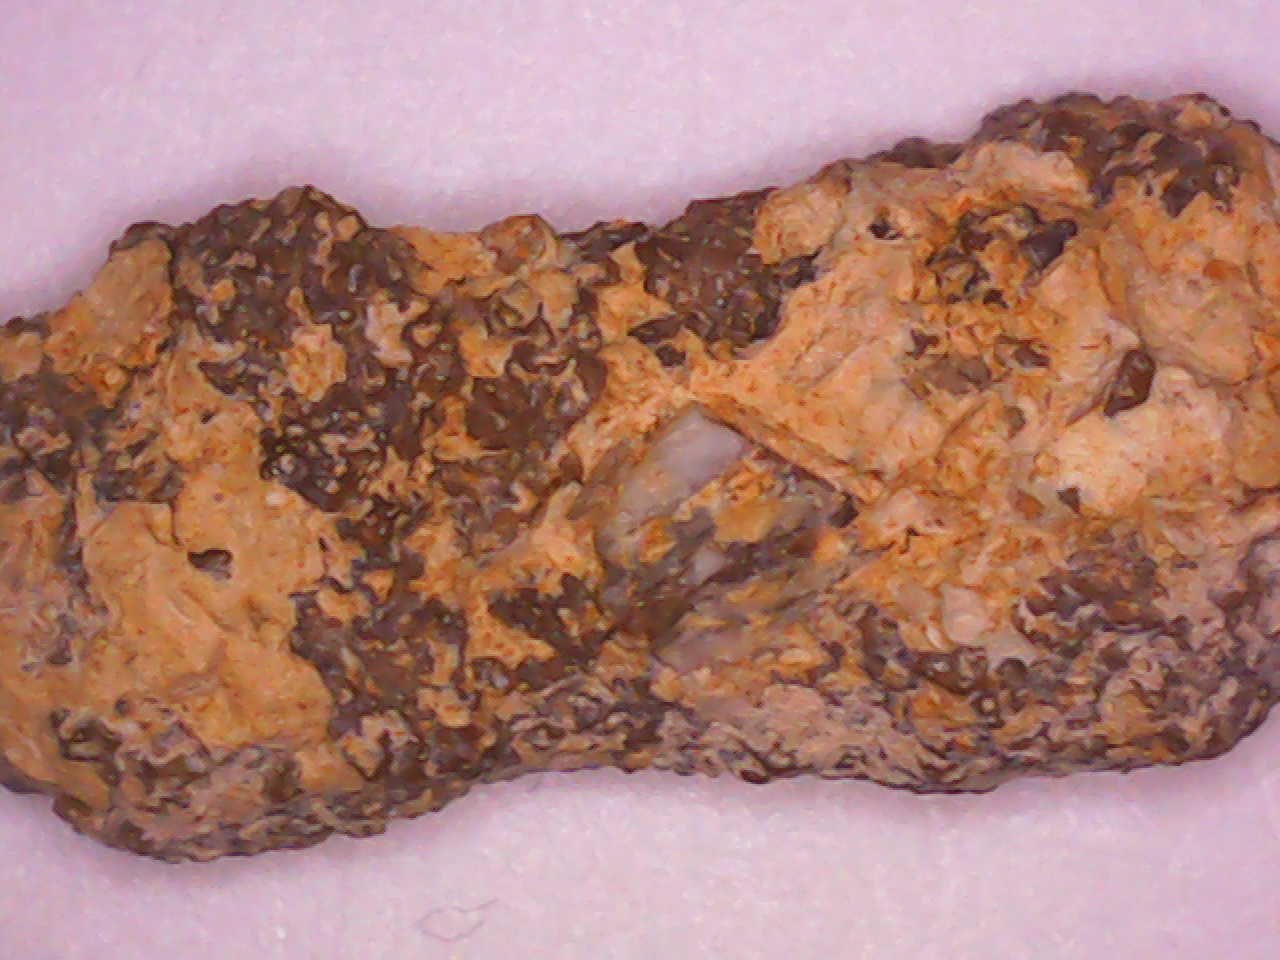 Coprolite with tooth/fish remain(?) inclusion